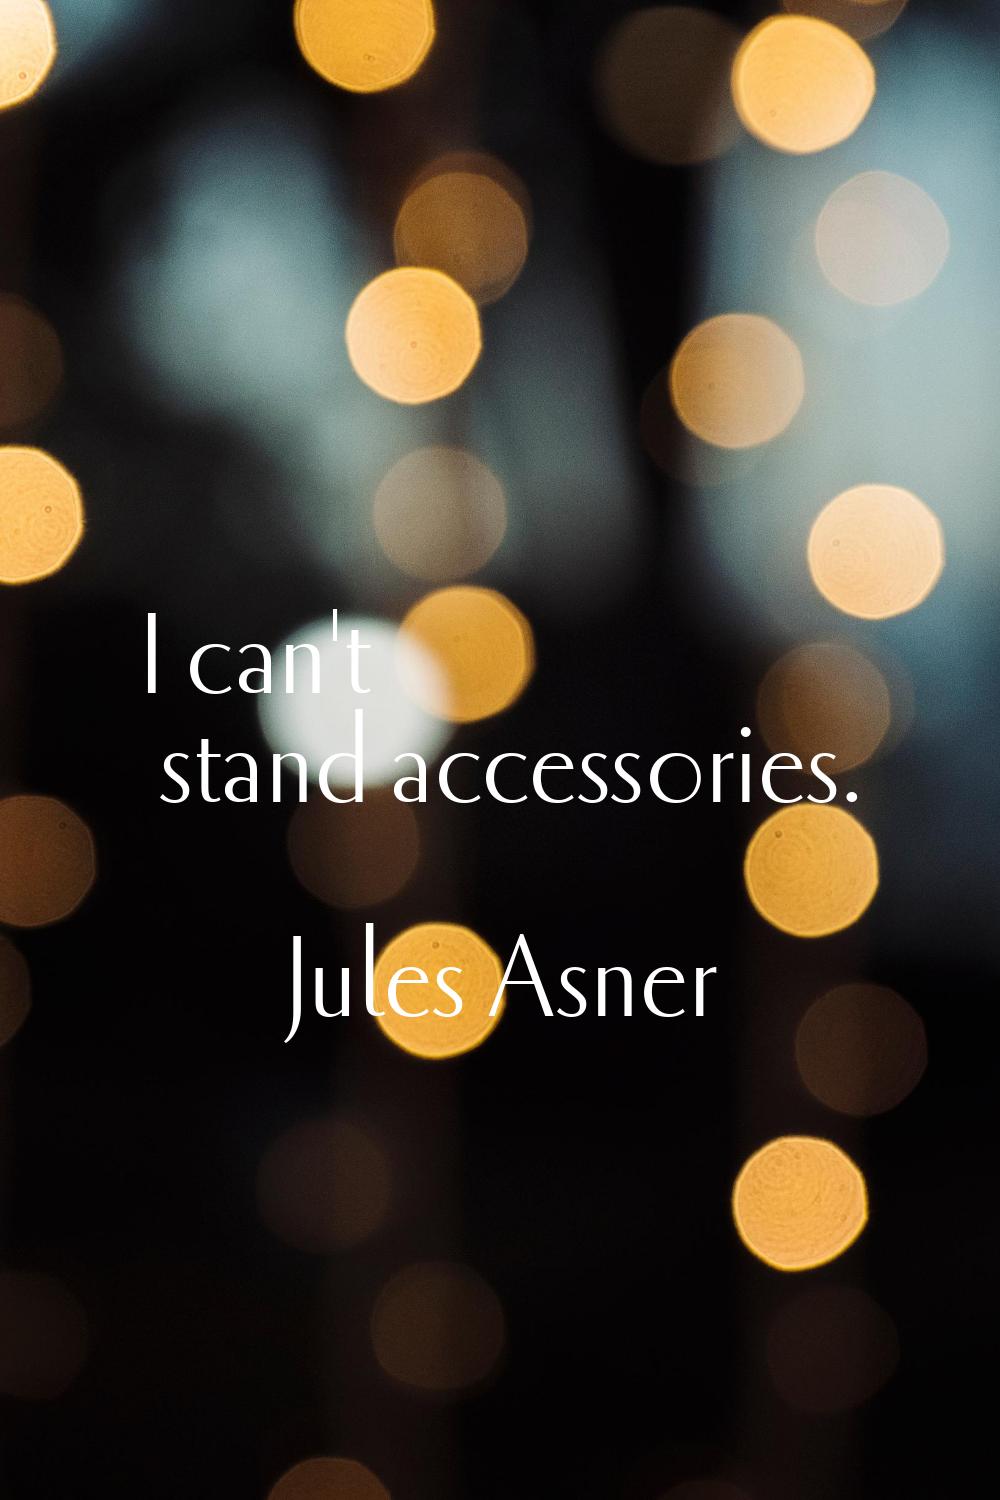 I can't stand accessories.